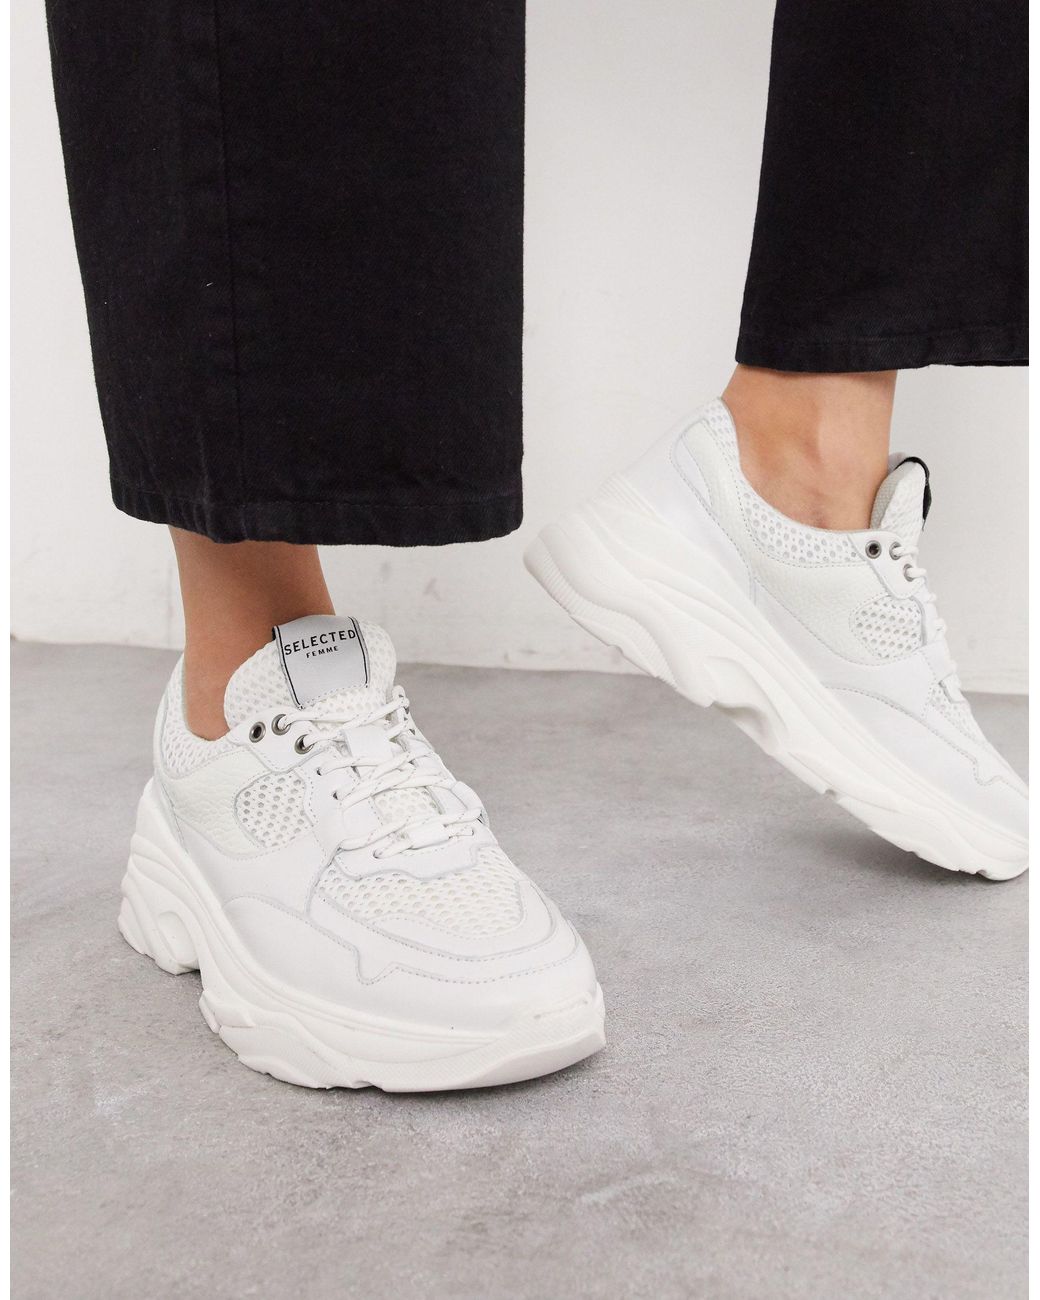 SELECTED Femme Chunky Leather Sneakers With Sports Mesh in White | Lyst